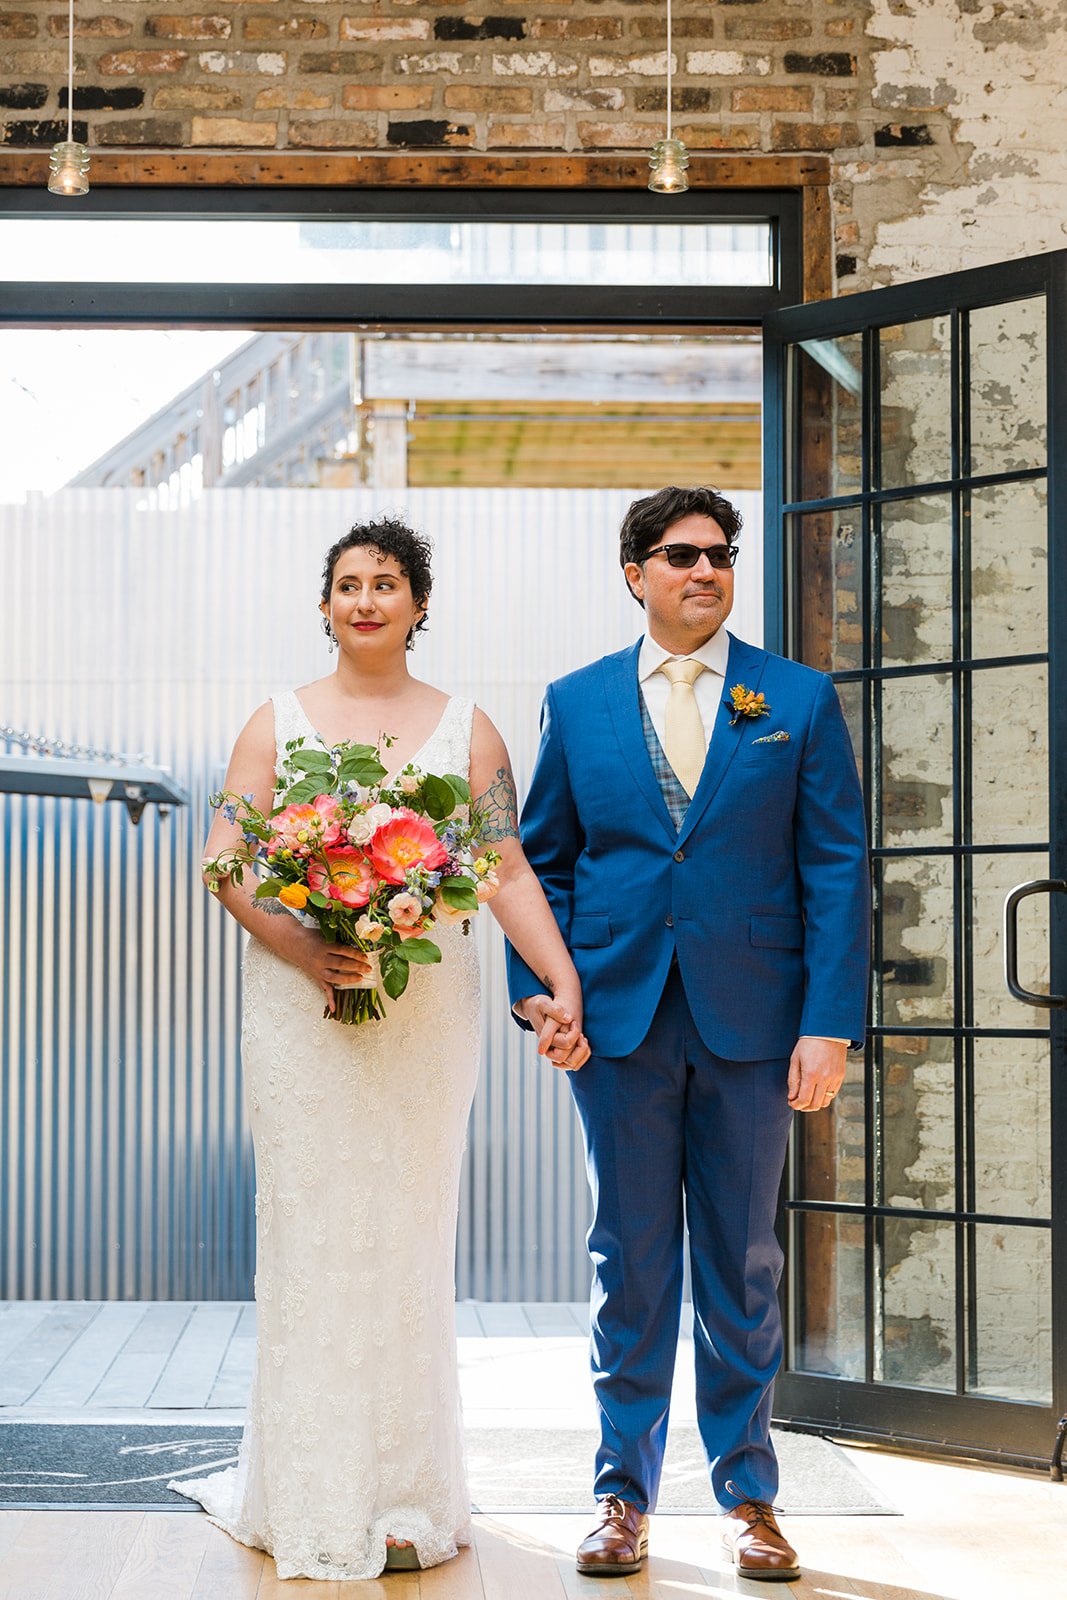  Candid, documentary photo of bride and groom entering their nontraditional Jewish and Venezuelan wedding ceremony in the round at The Joinery Chicago an Industrial loft wedding venue In Logan Square. 